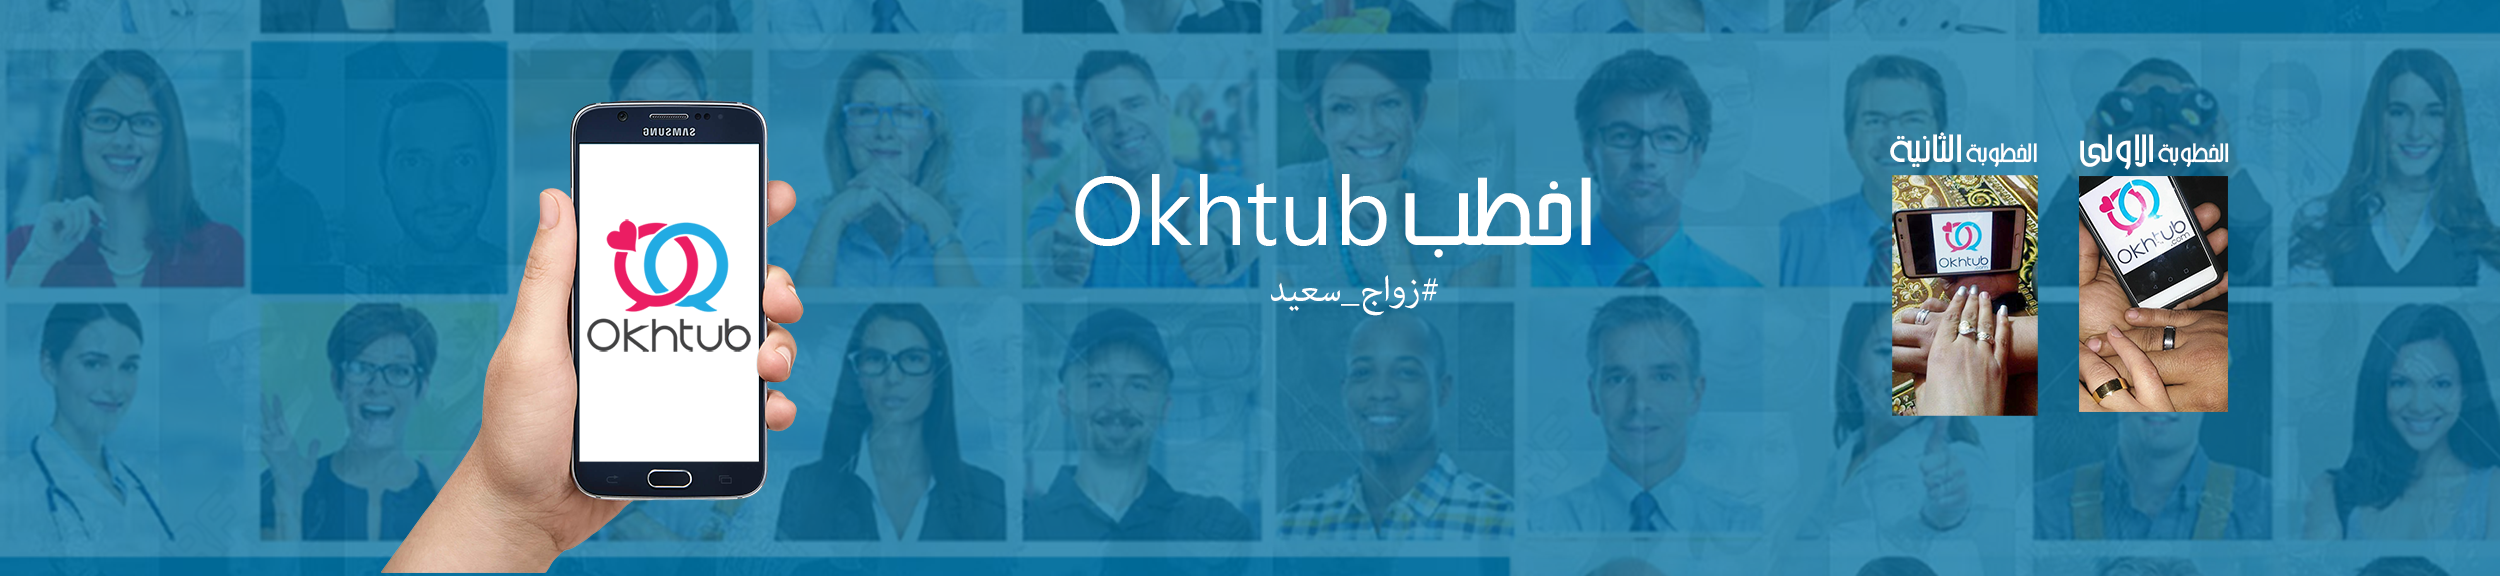 Okhtub: Intelligent Serious Matchmaking App for Marriage